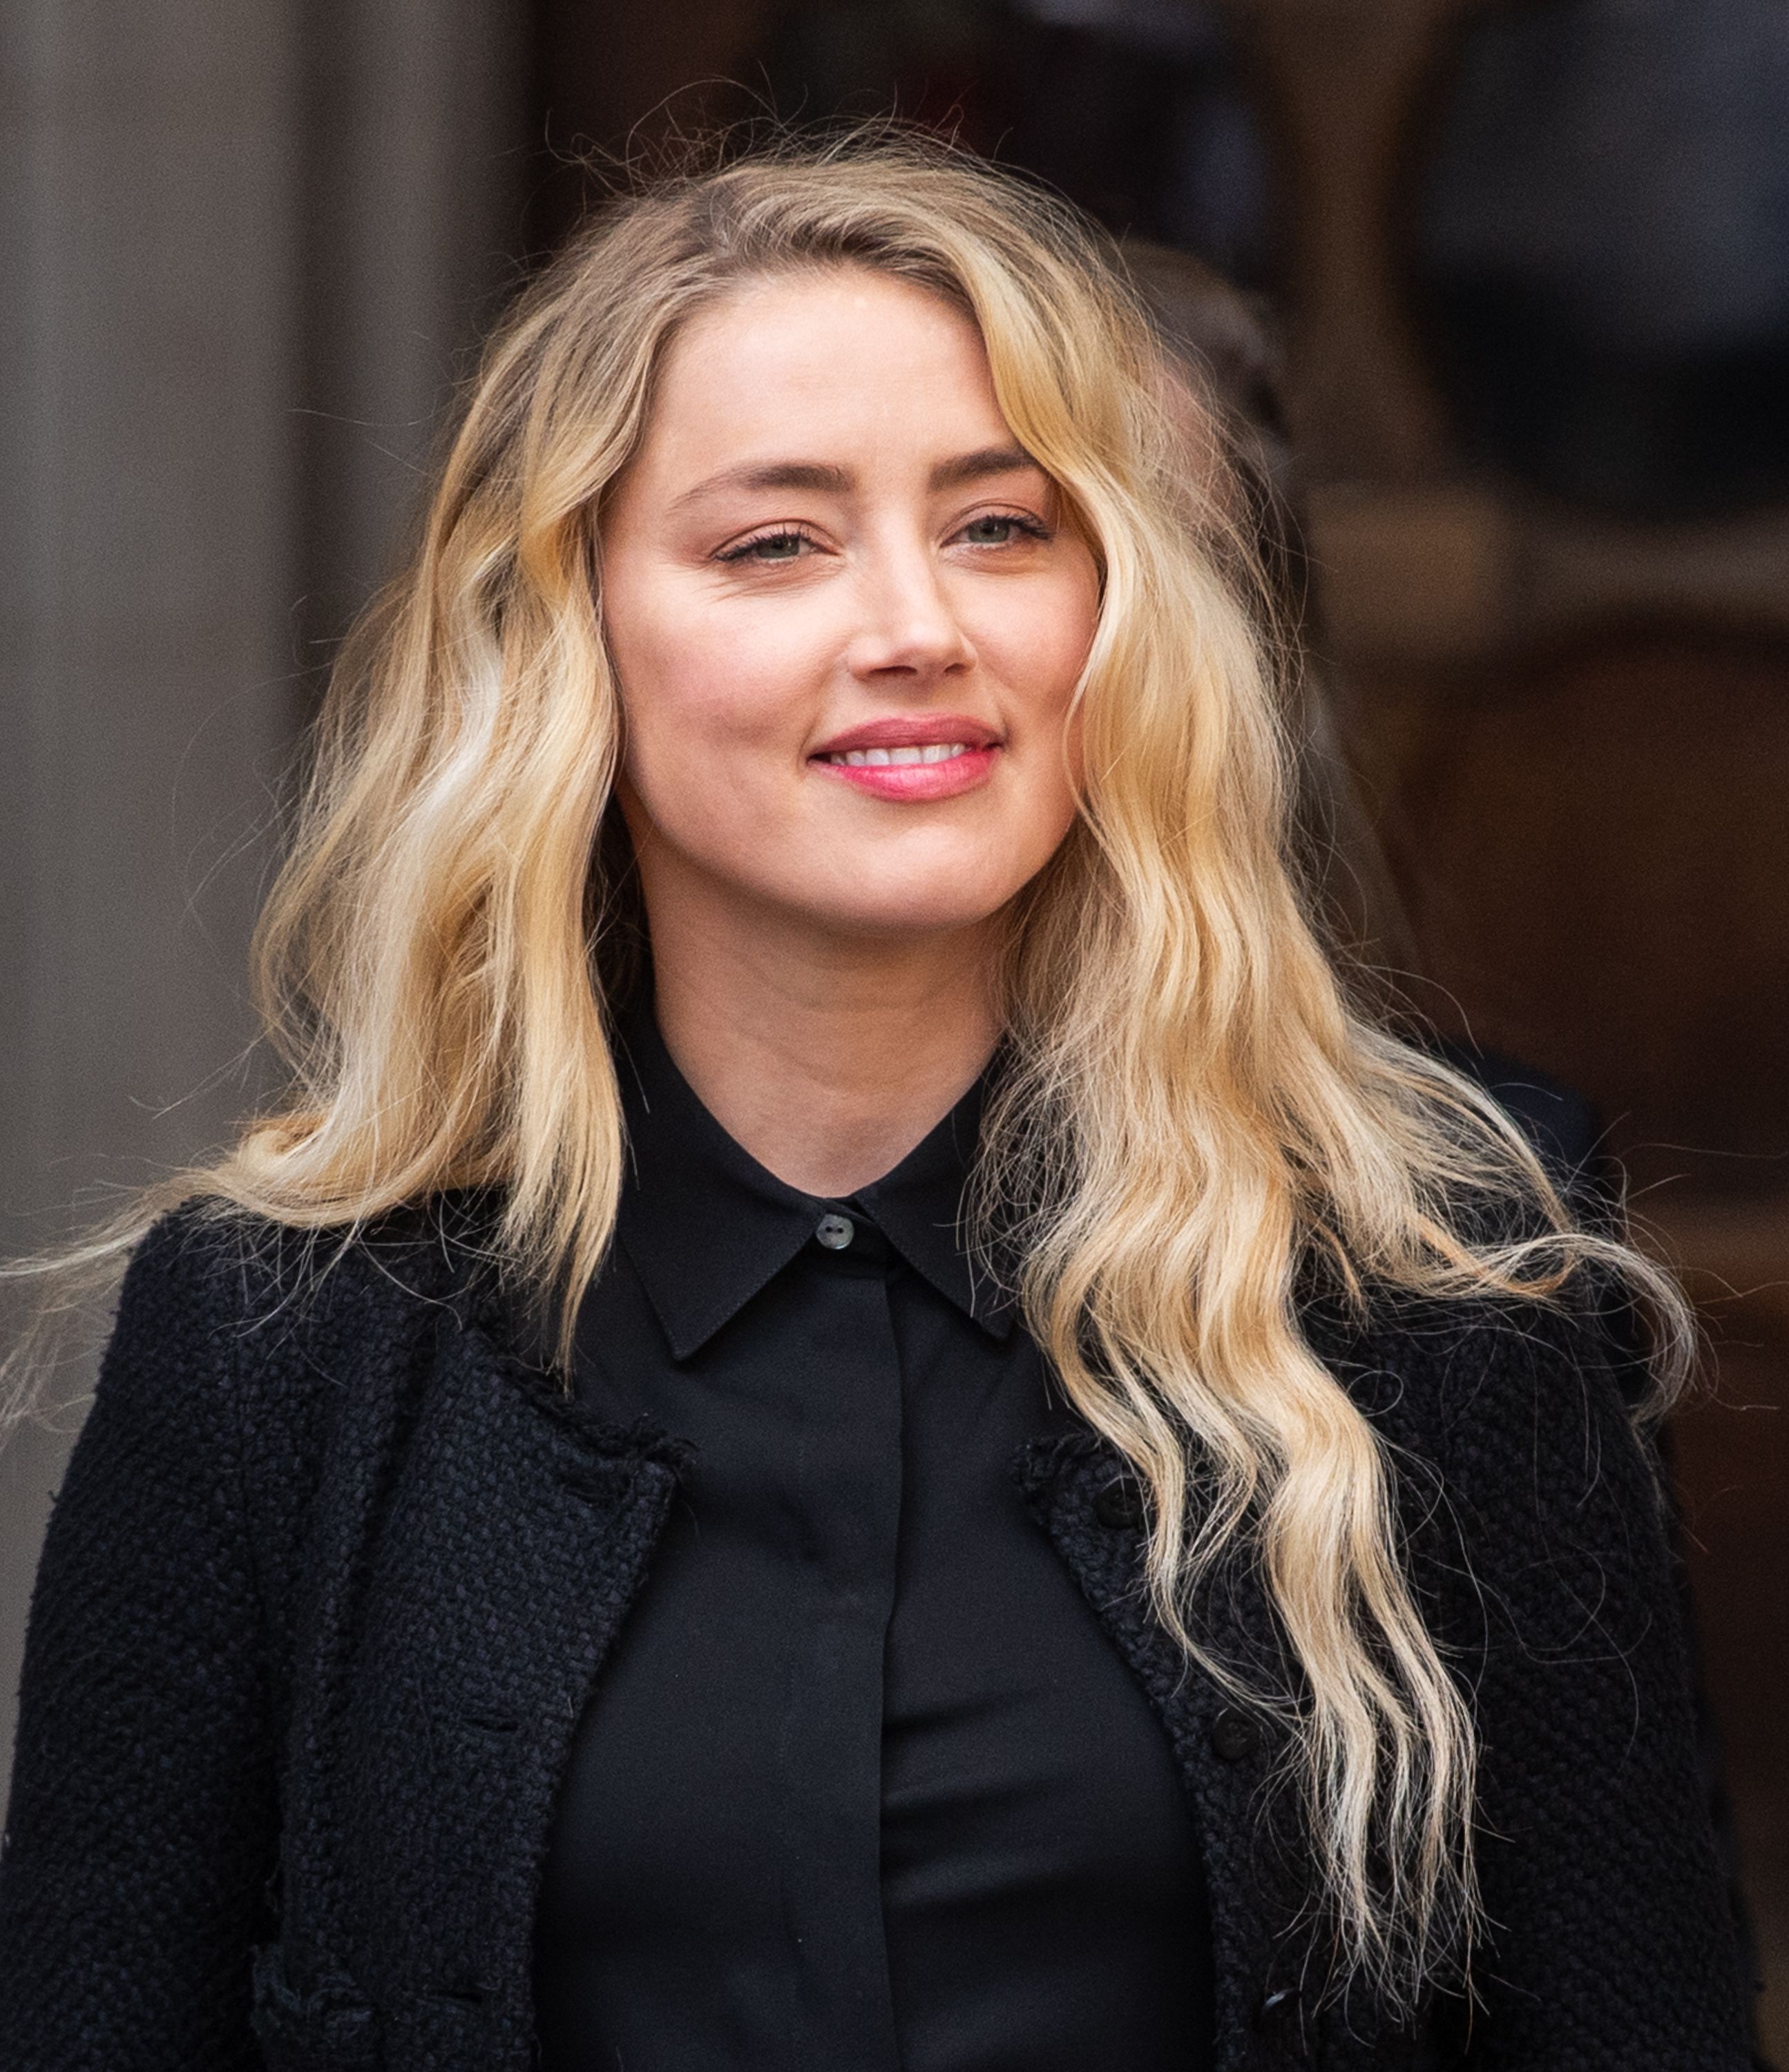 Amber Heard at the Royal Courts of Justice, Strand on July 28, 2020 in London, England. | Source: Getty Images